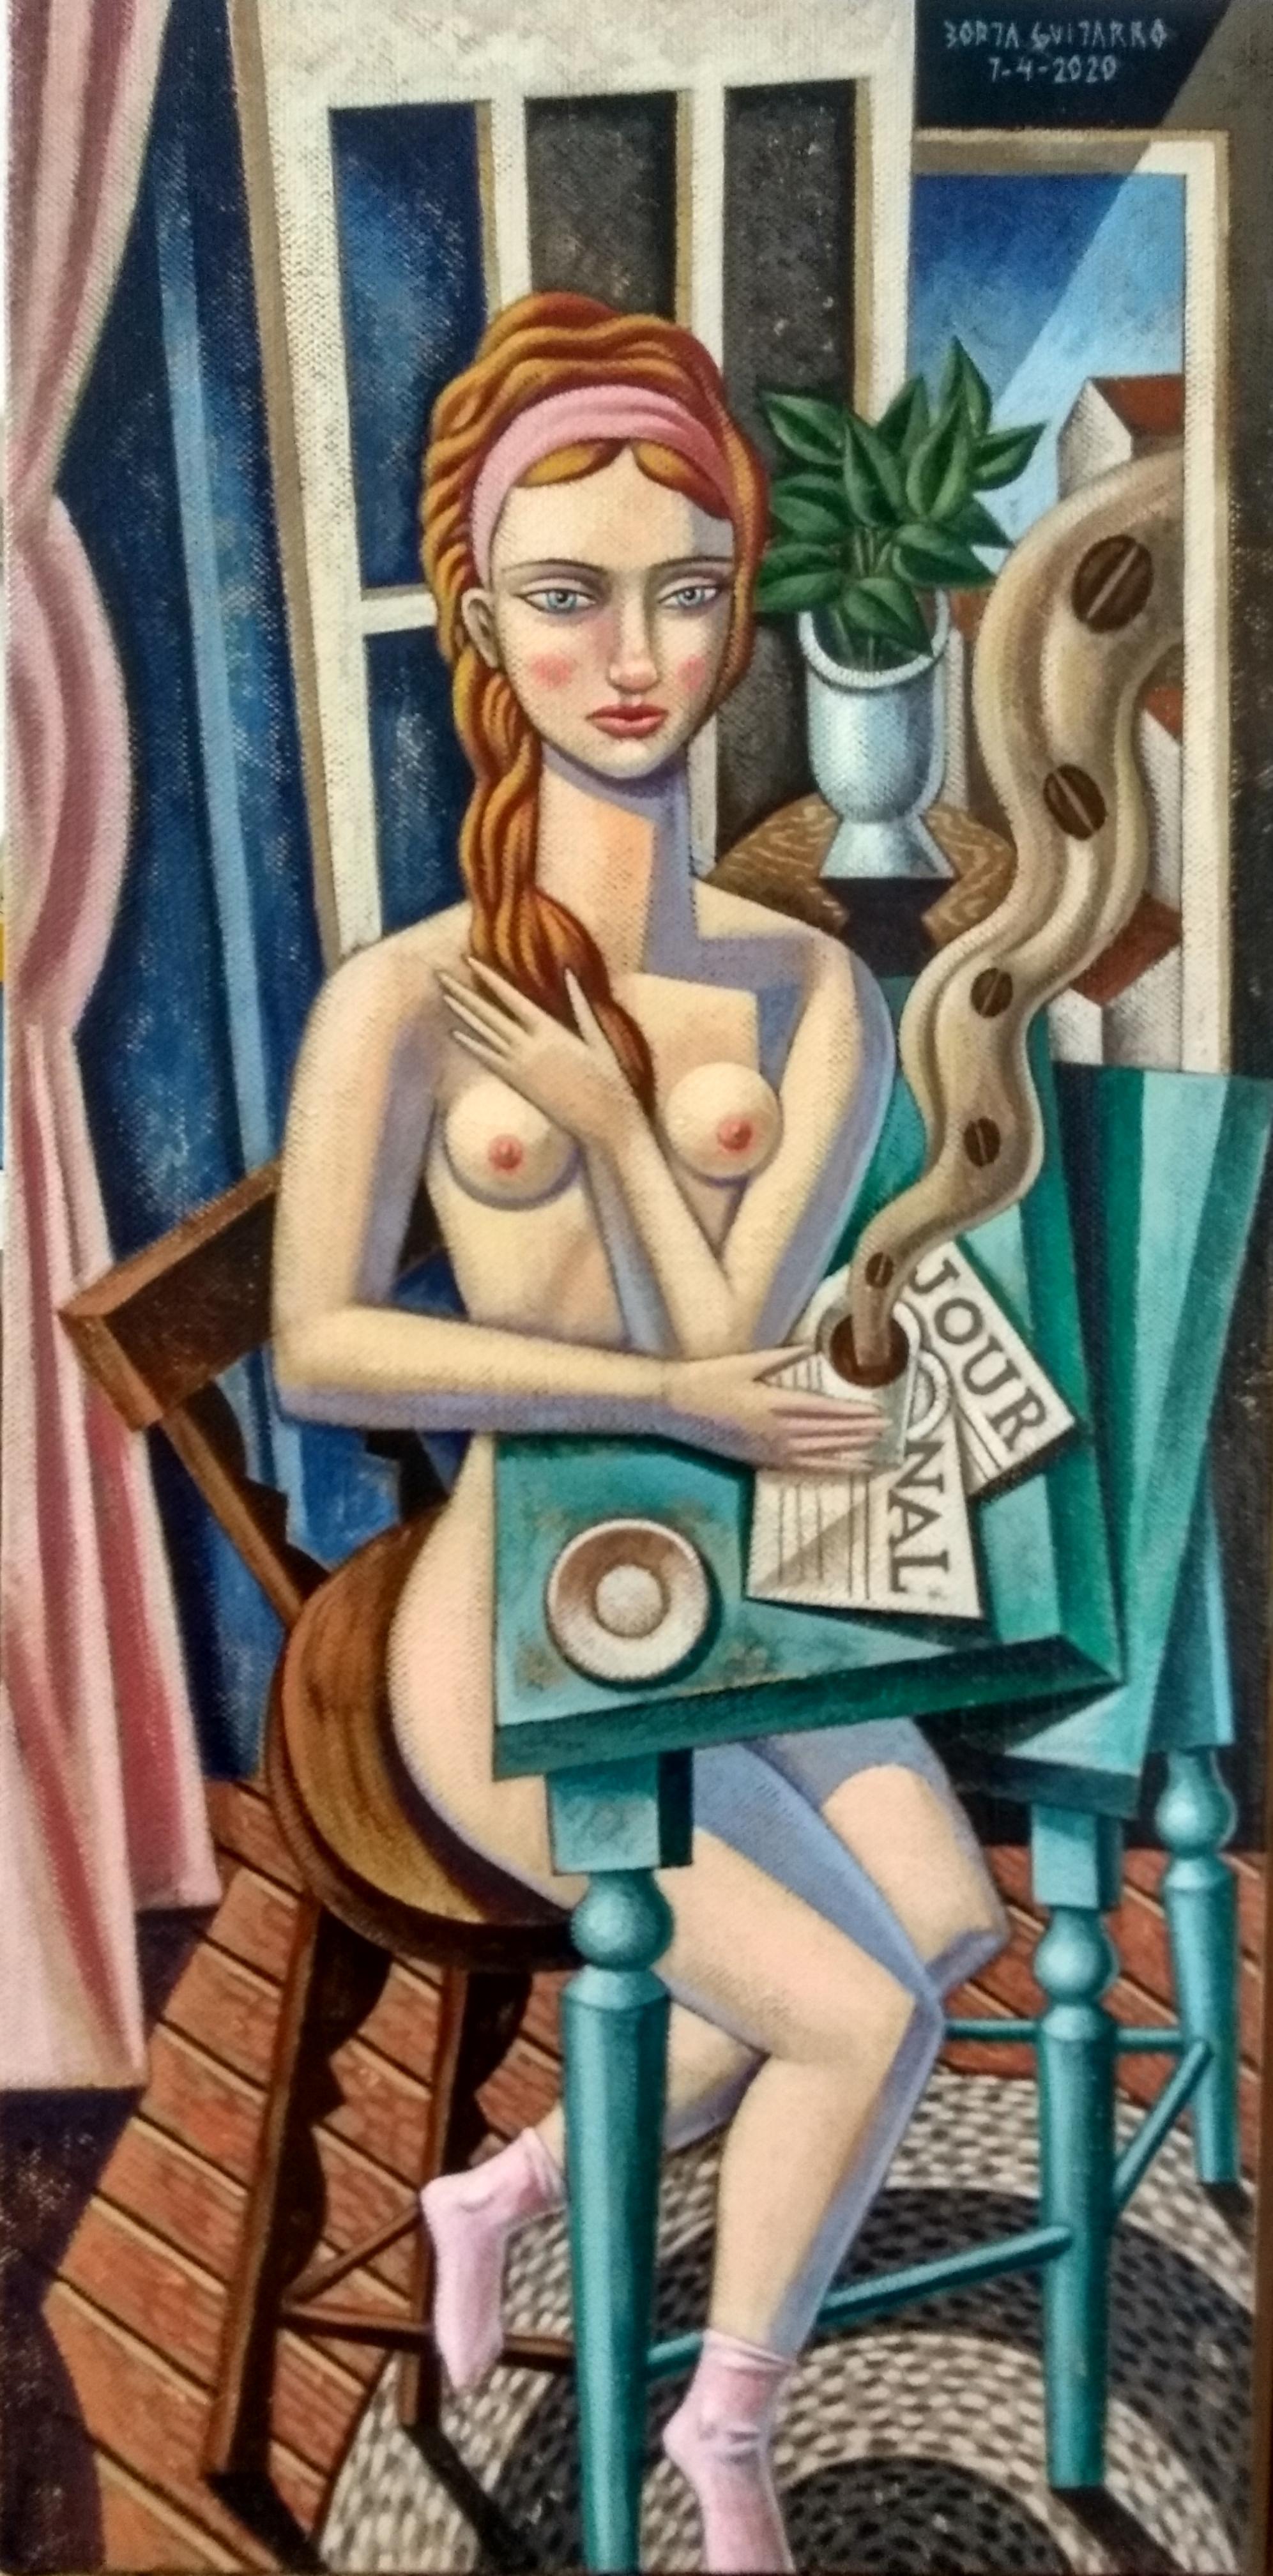 Mujer con Cafe - original female form acrylic painting figurative modern cubist